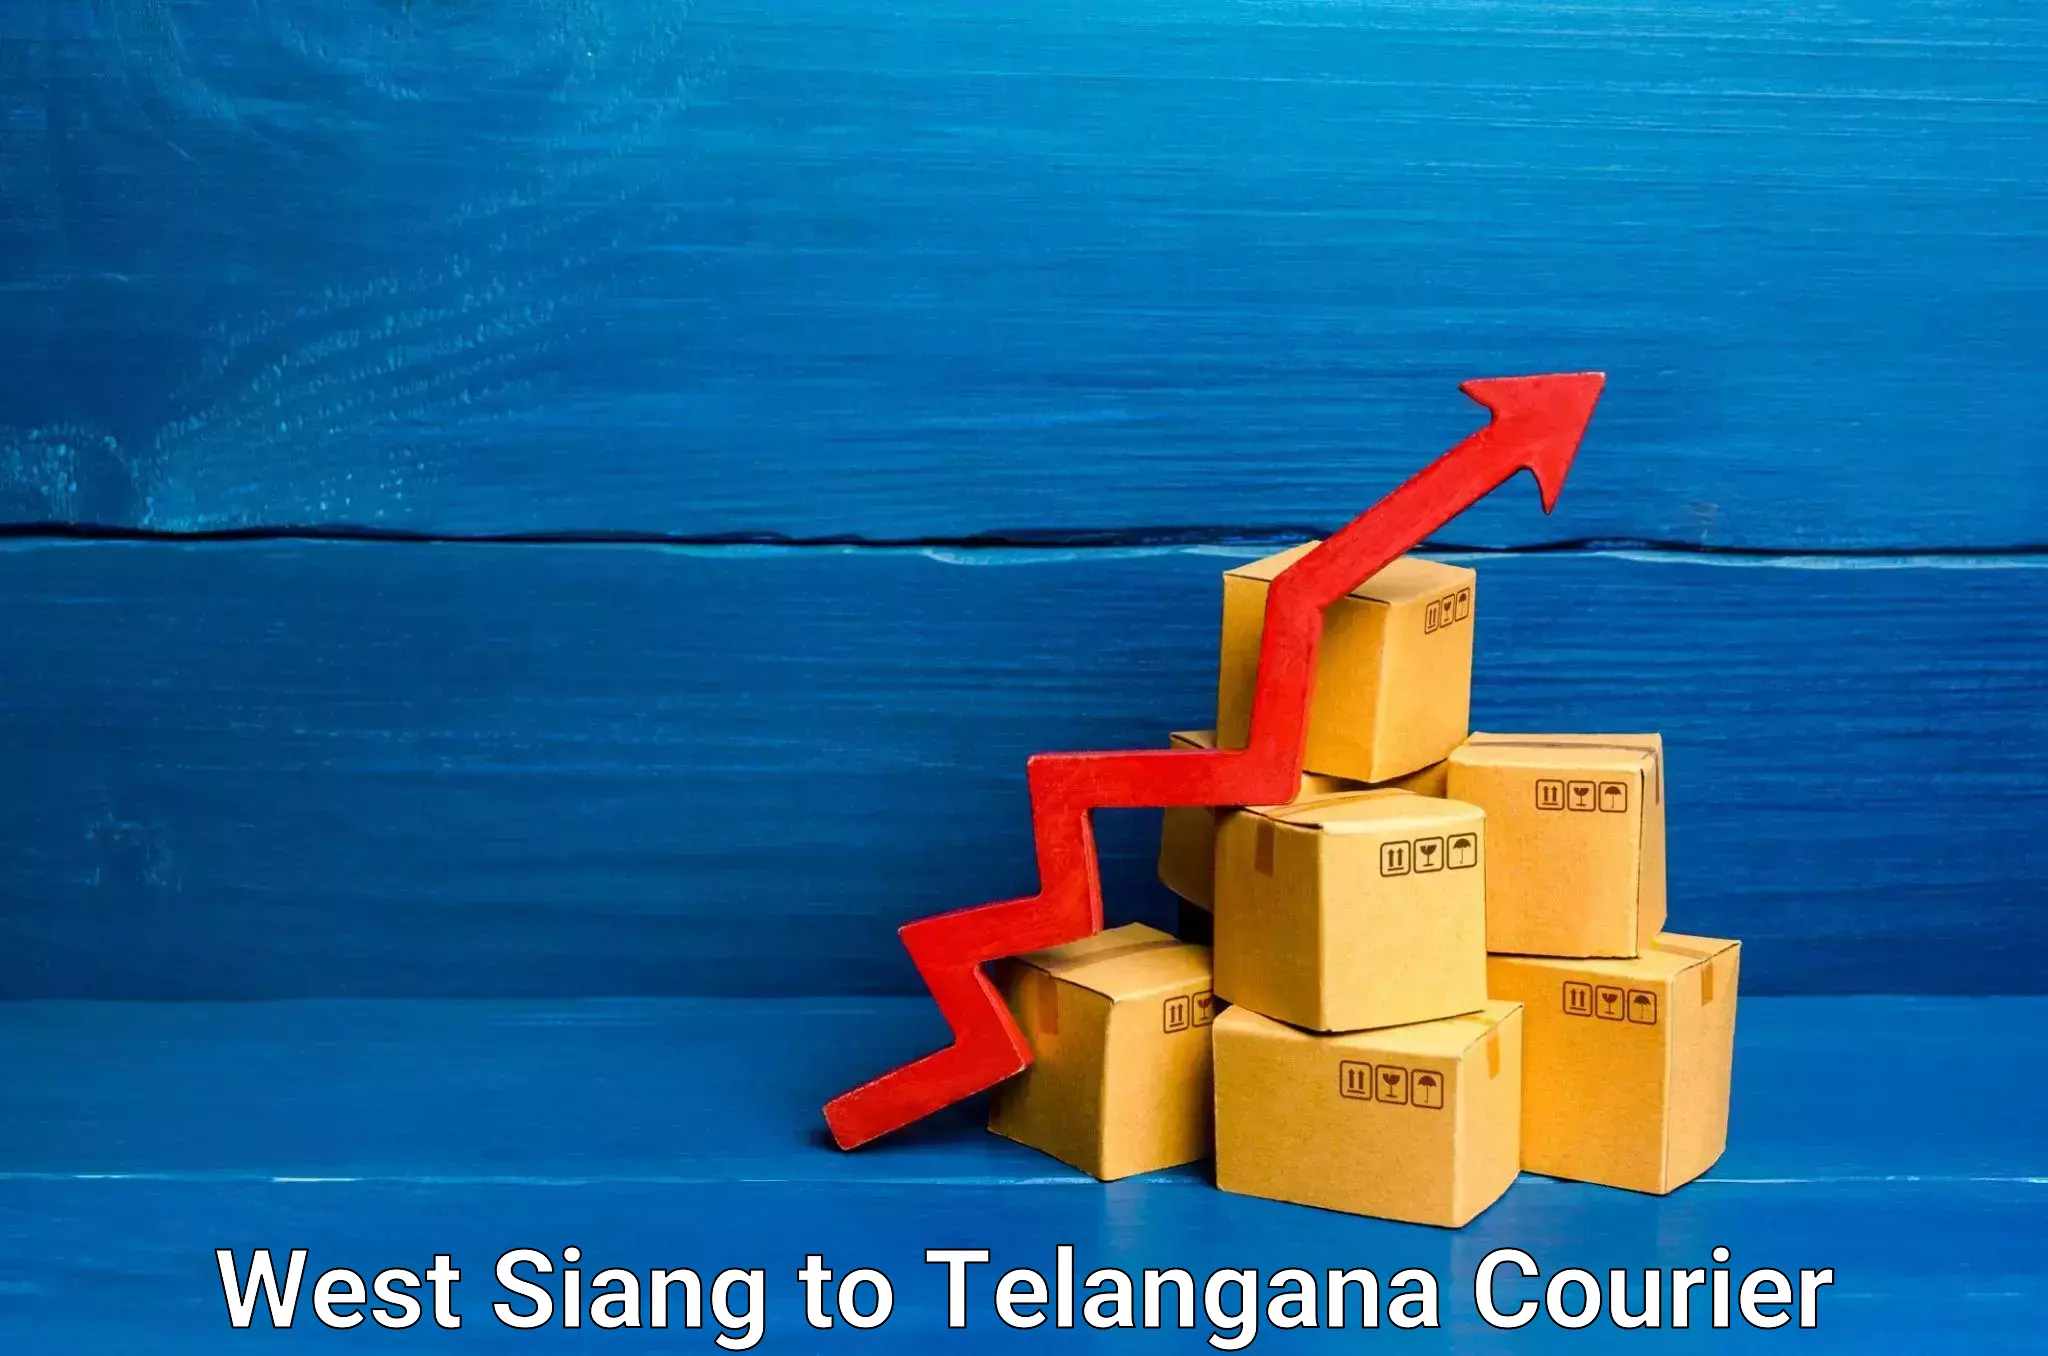 Courier insurance in West Siang to Tiryani